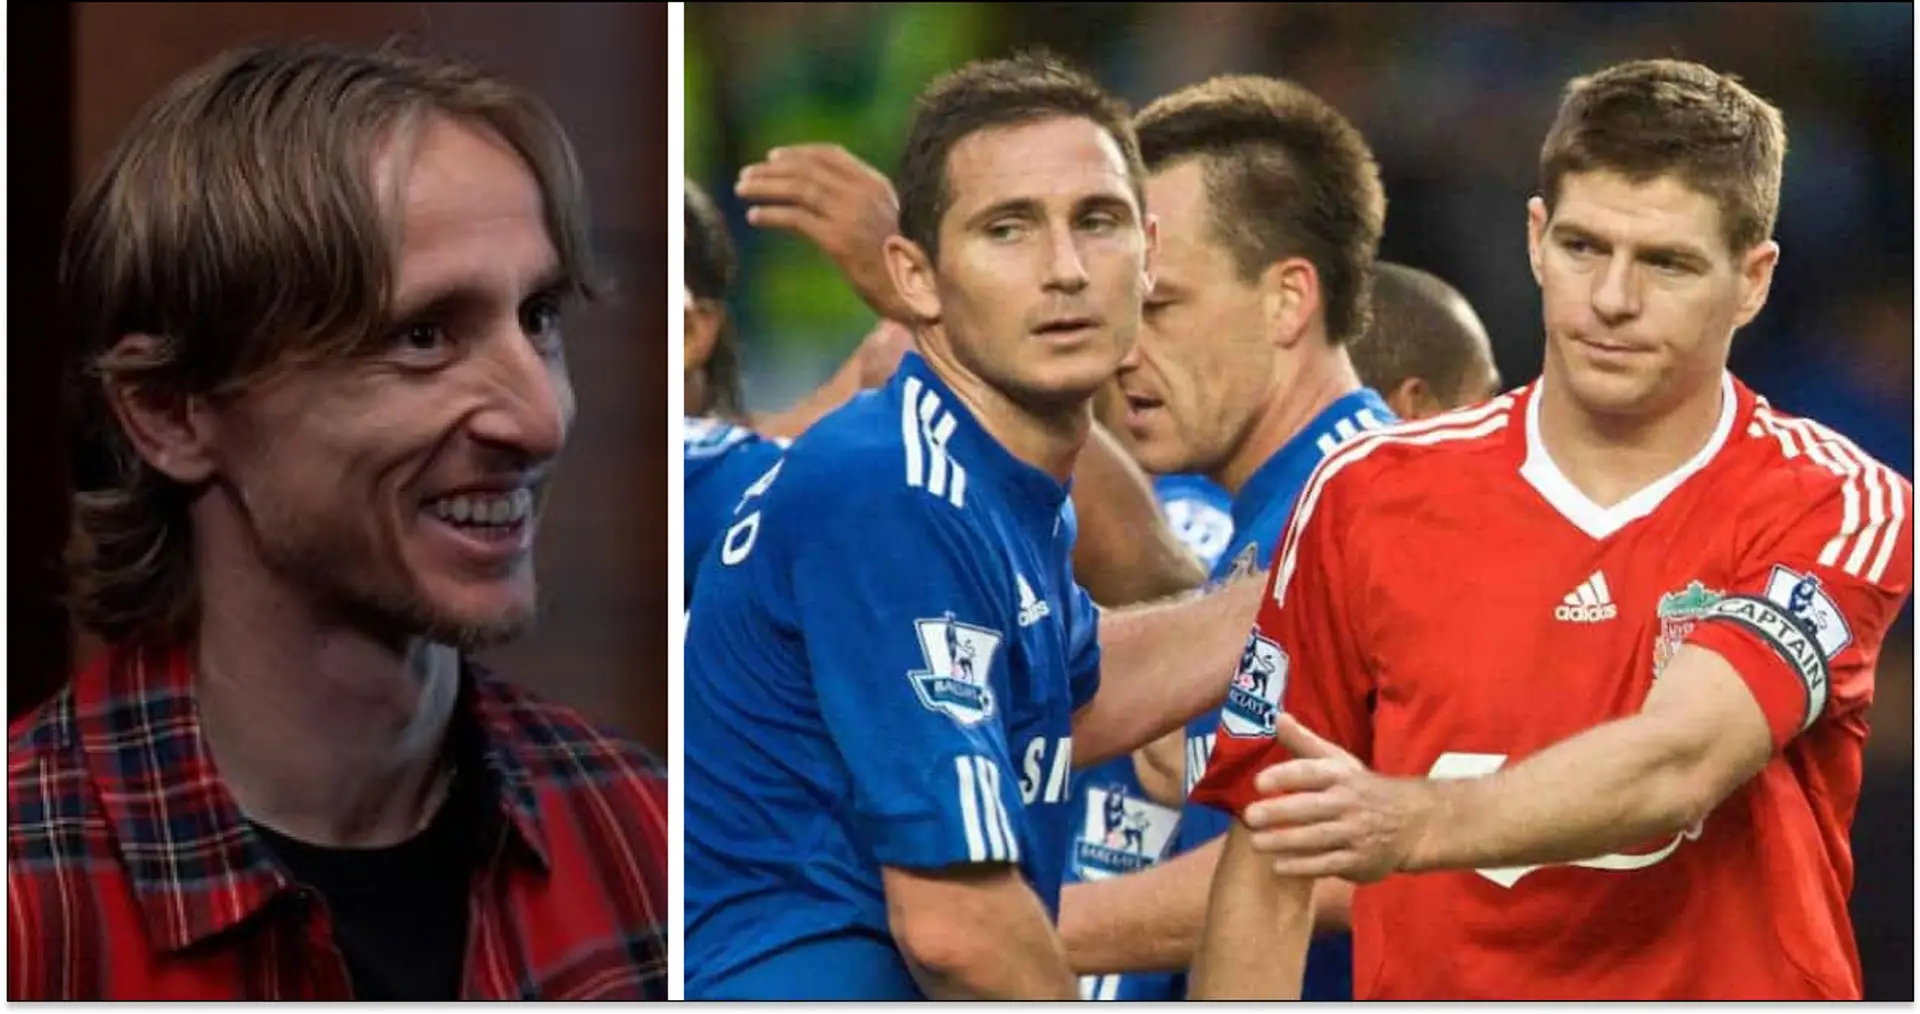 'I played Lampard and Gerrard but he was different': Modric names Barca legend as toughest opponent